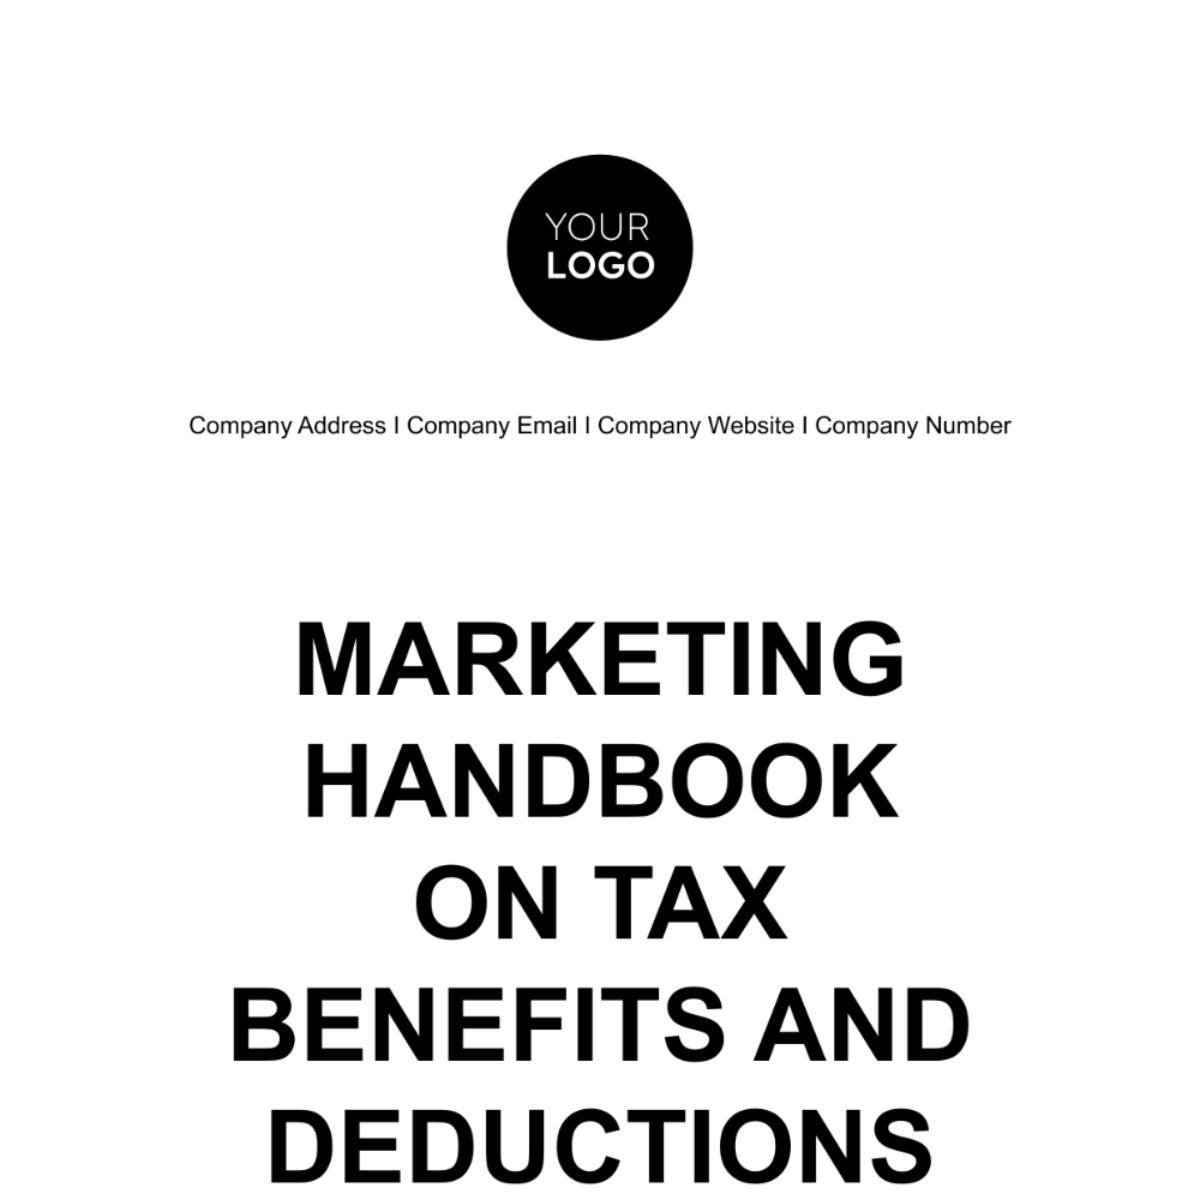 Marketing Handbook on Tax Benefits and Deductions Template